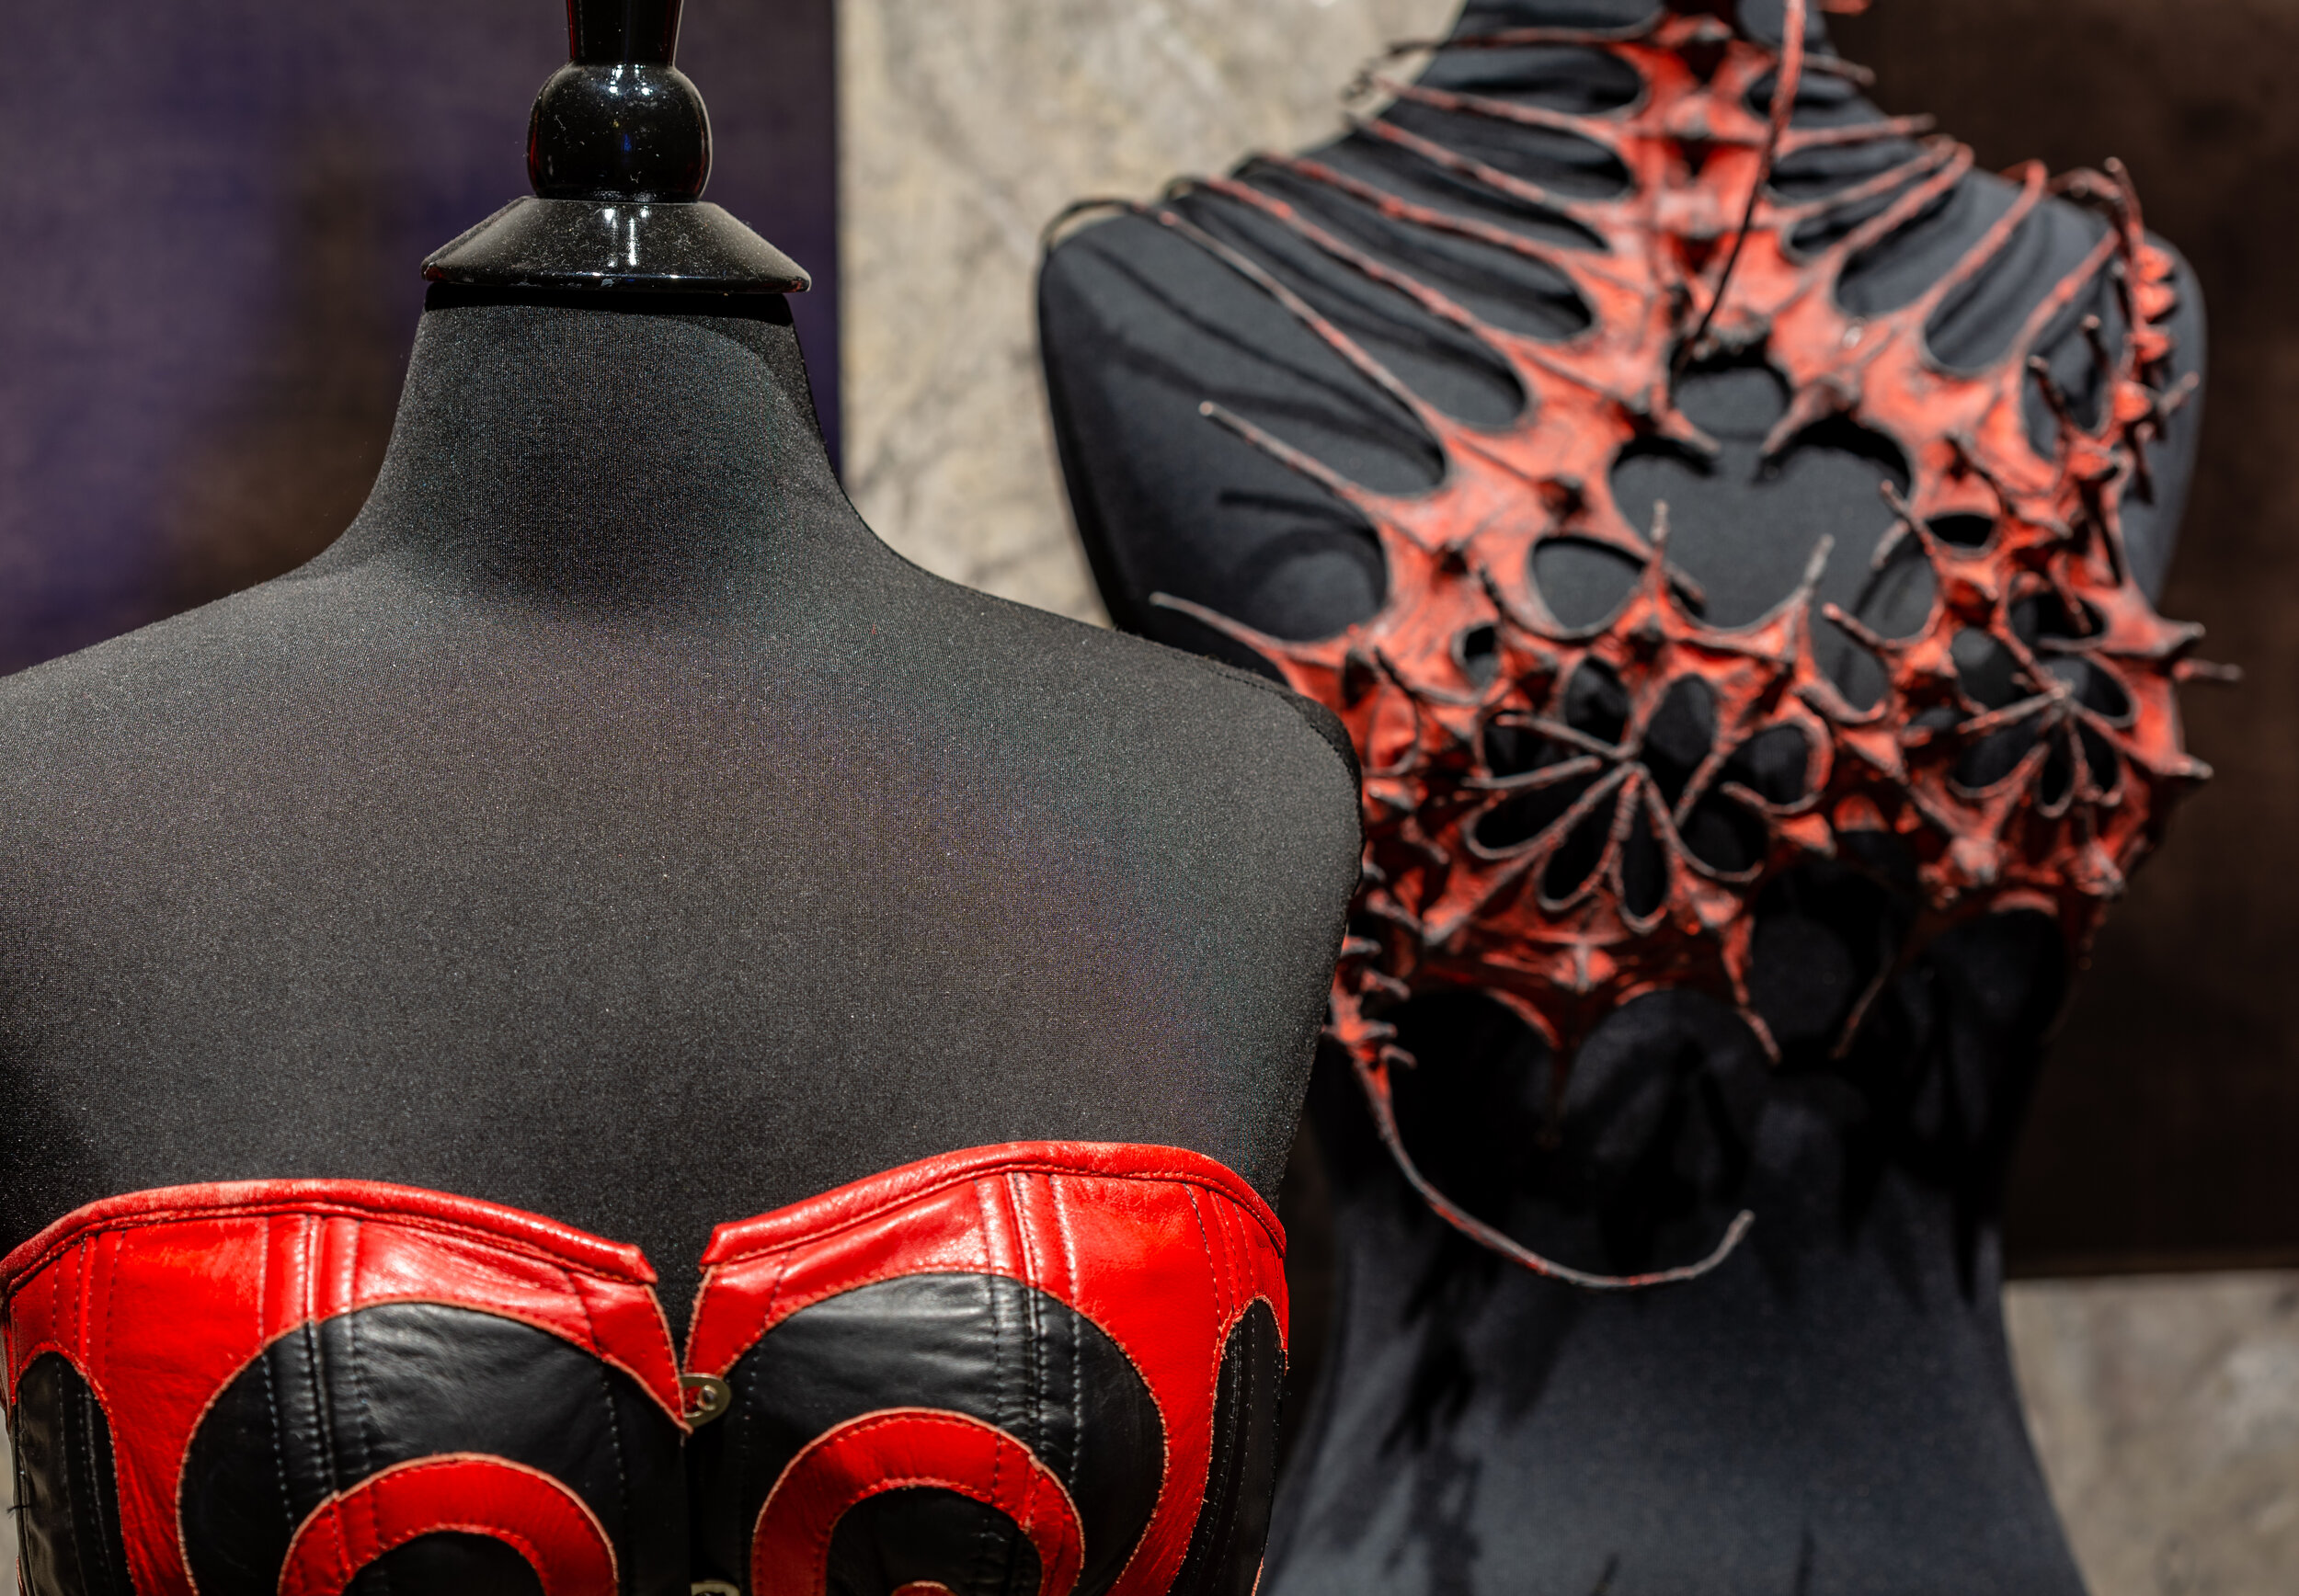  Close Up L:  Autumn Adamme  |  Dark Garden Corsetry    made for Cathie Jung R:  Nika Danielska  |  Exoskeleton Bra.   Nika Danielska ’s  Exoskeleton Bra  provides an armored protection for the fragile body. It references the woman warrior, exuding f